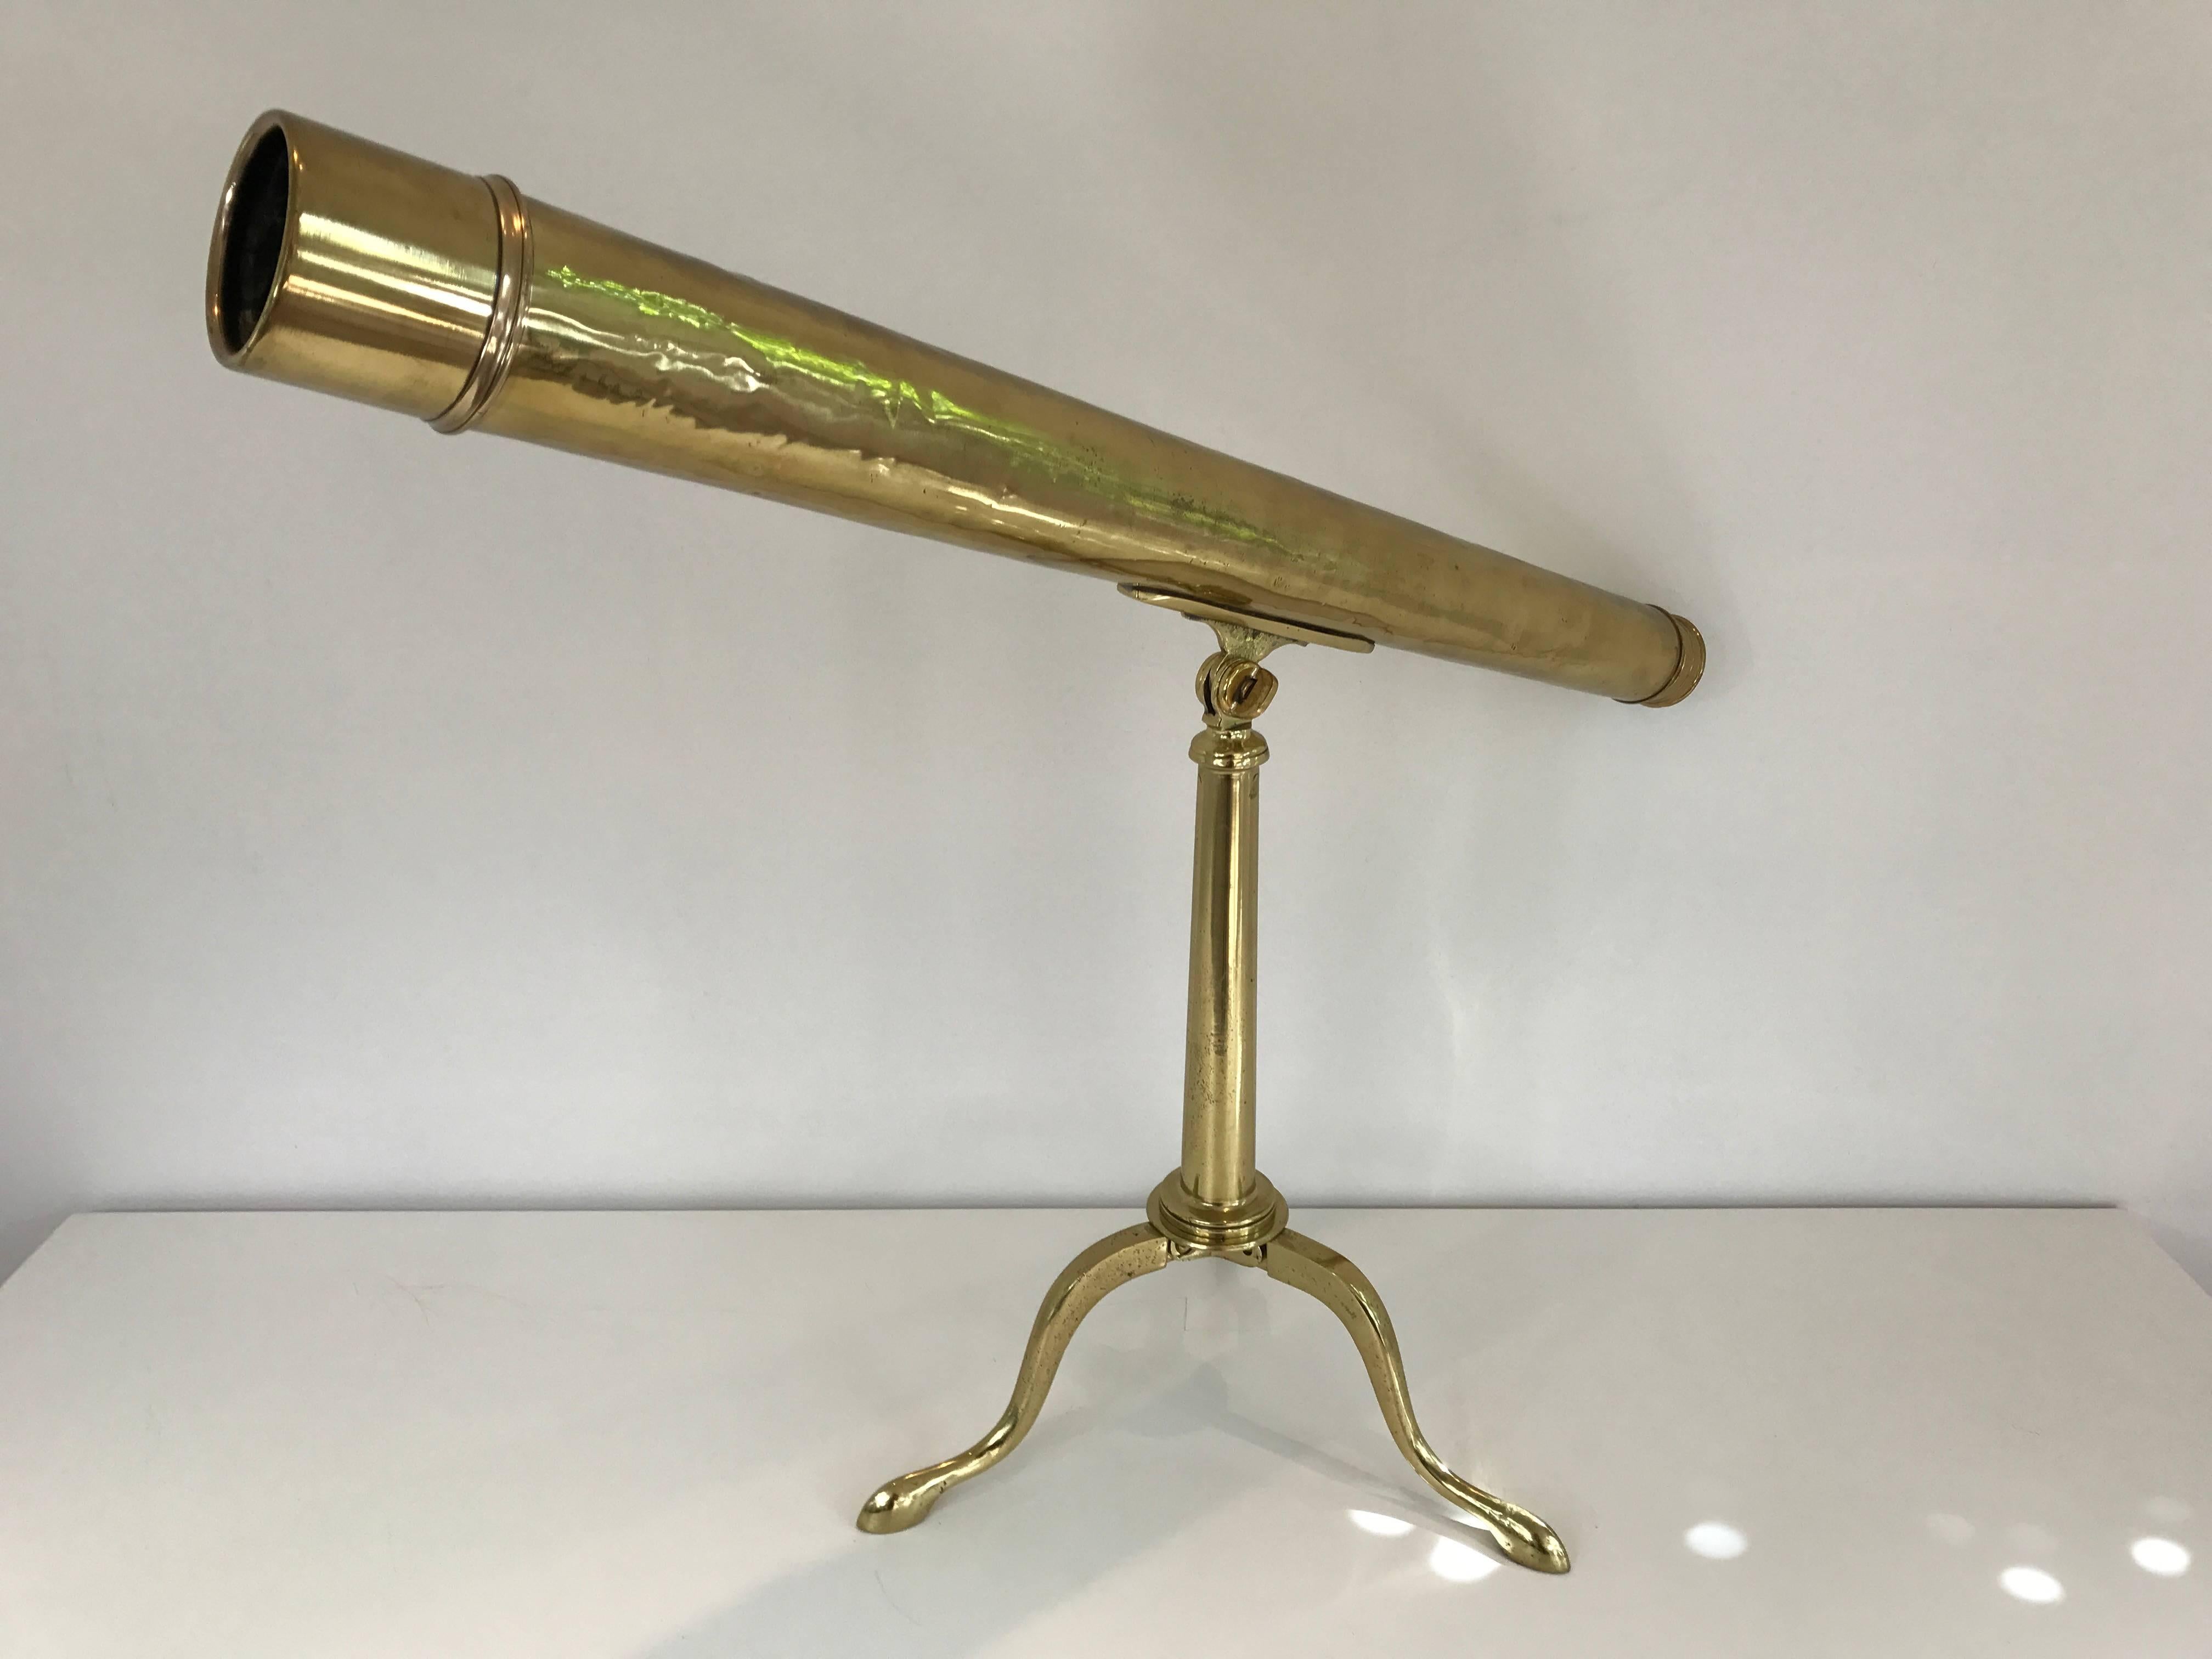 A solid brass 19th century English telescope on collapsible brass stand. Lens is currently not in working order but would make a lovely addition as a decorative object.